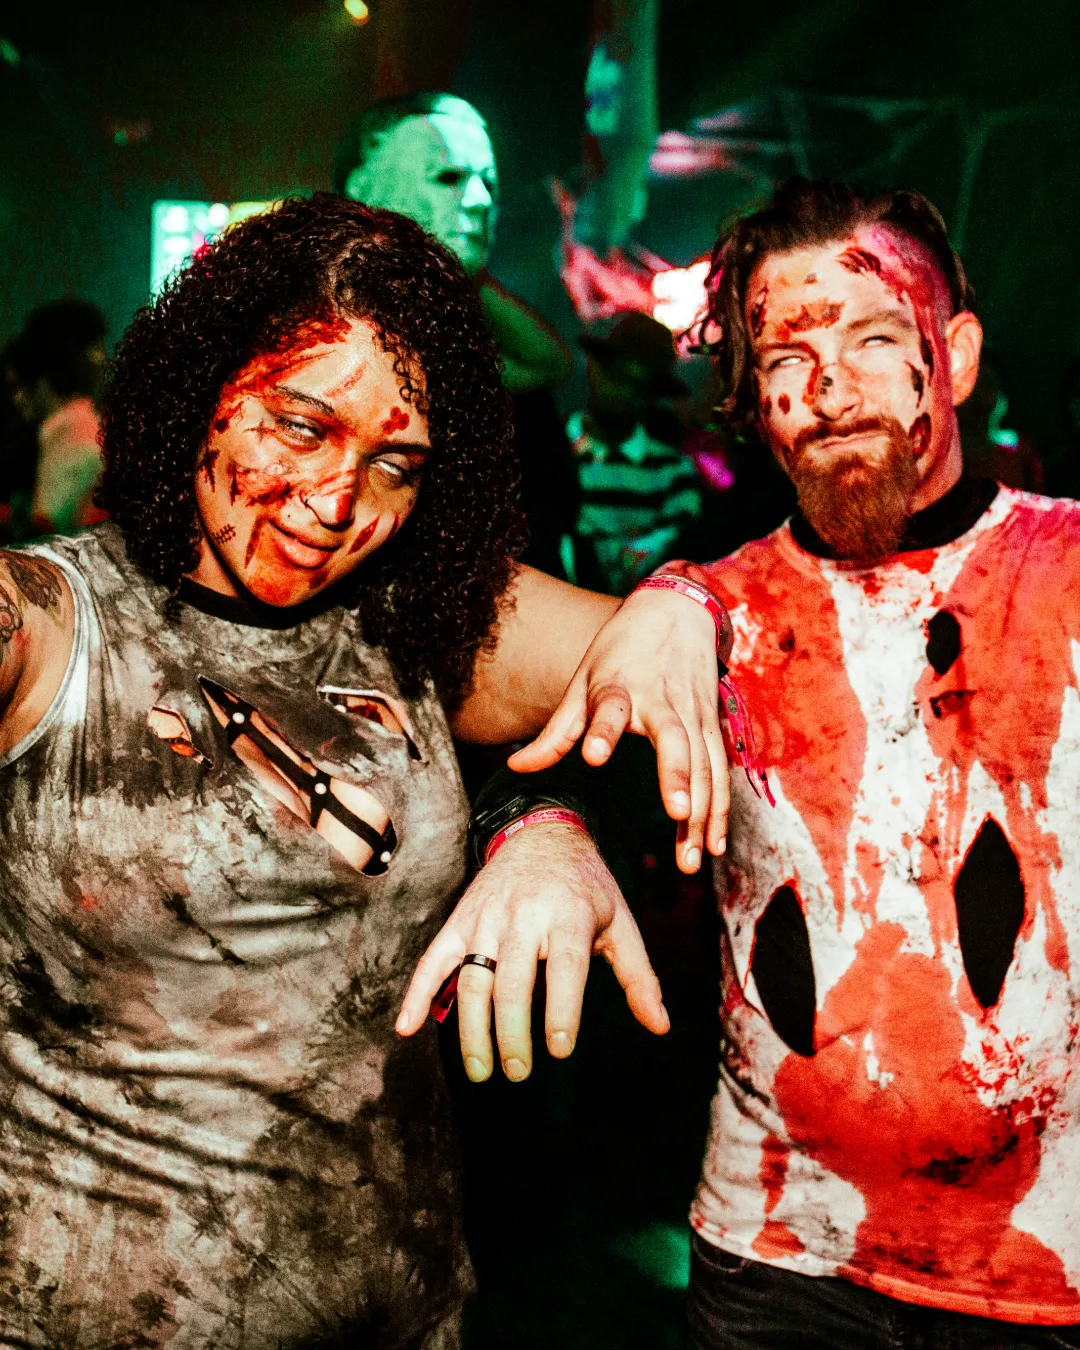 Real live zombies seen add to the atmosphere at the Halloween Bar Crawl
